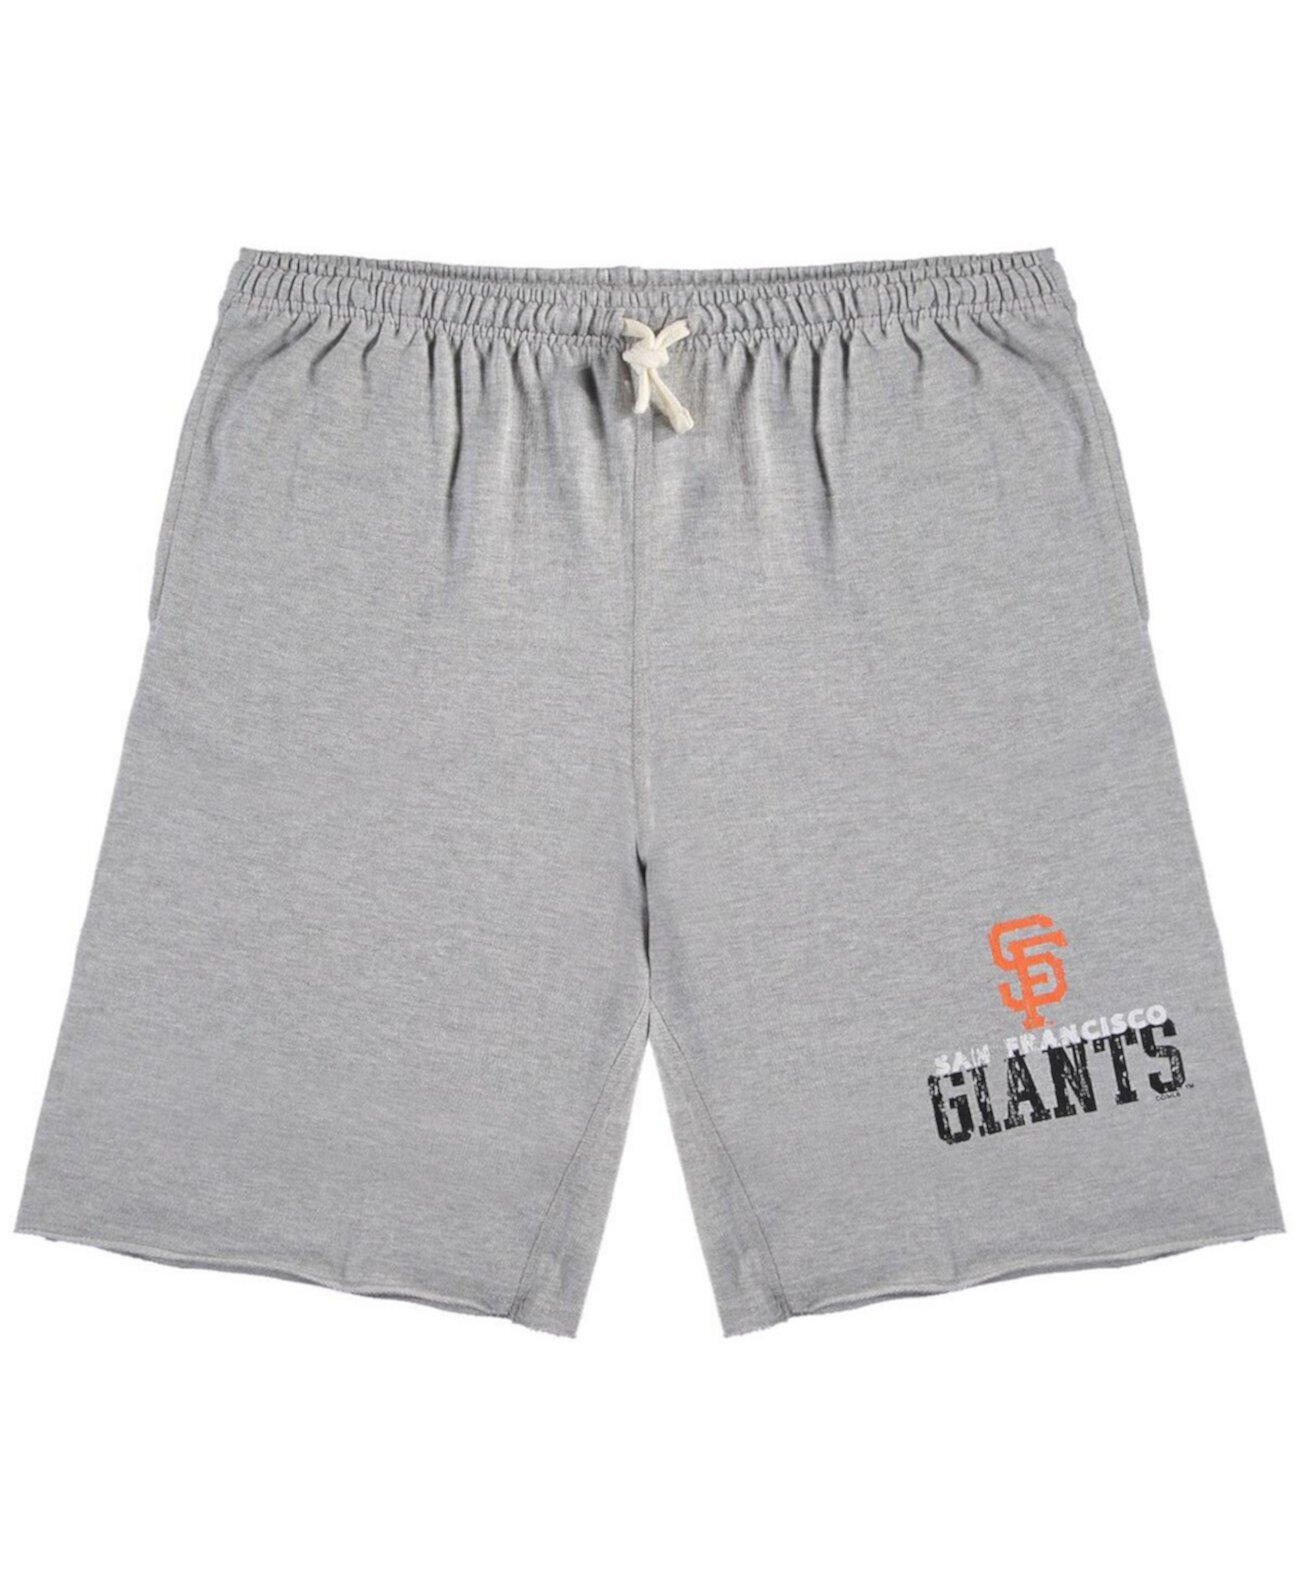 Men's Heathered Gray Distressed San Francisco Giants Big and Tall French Terry Shorts Profile